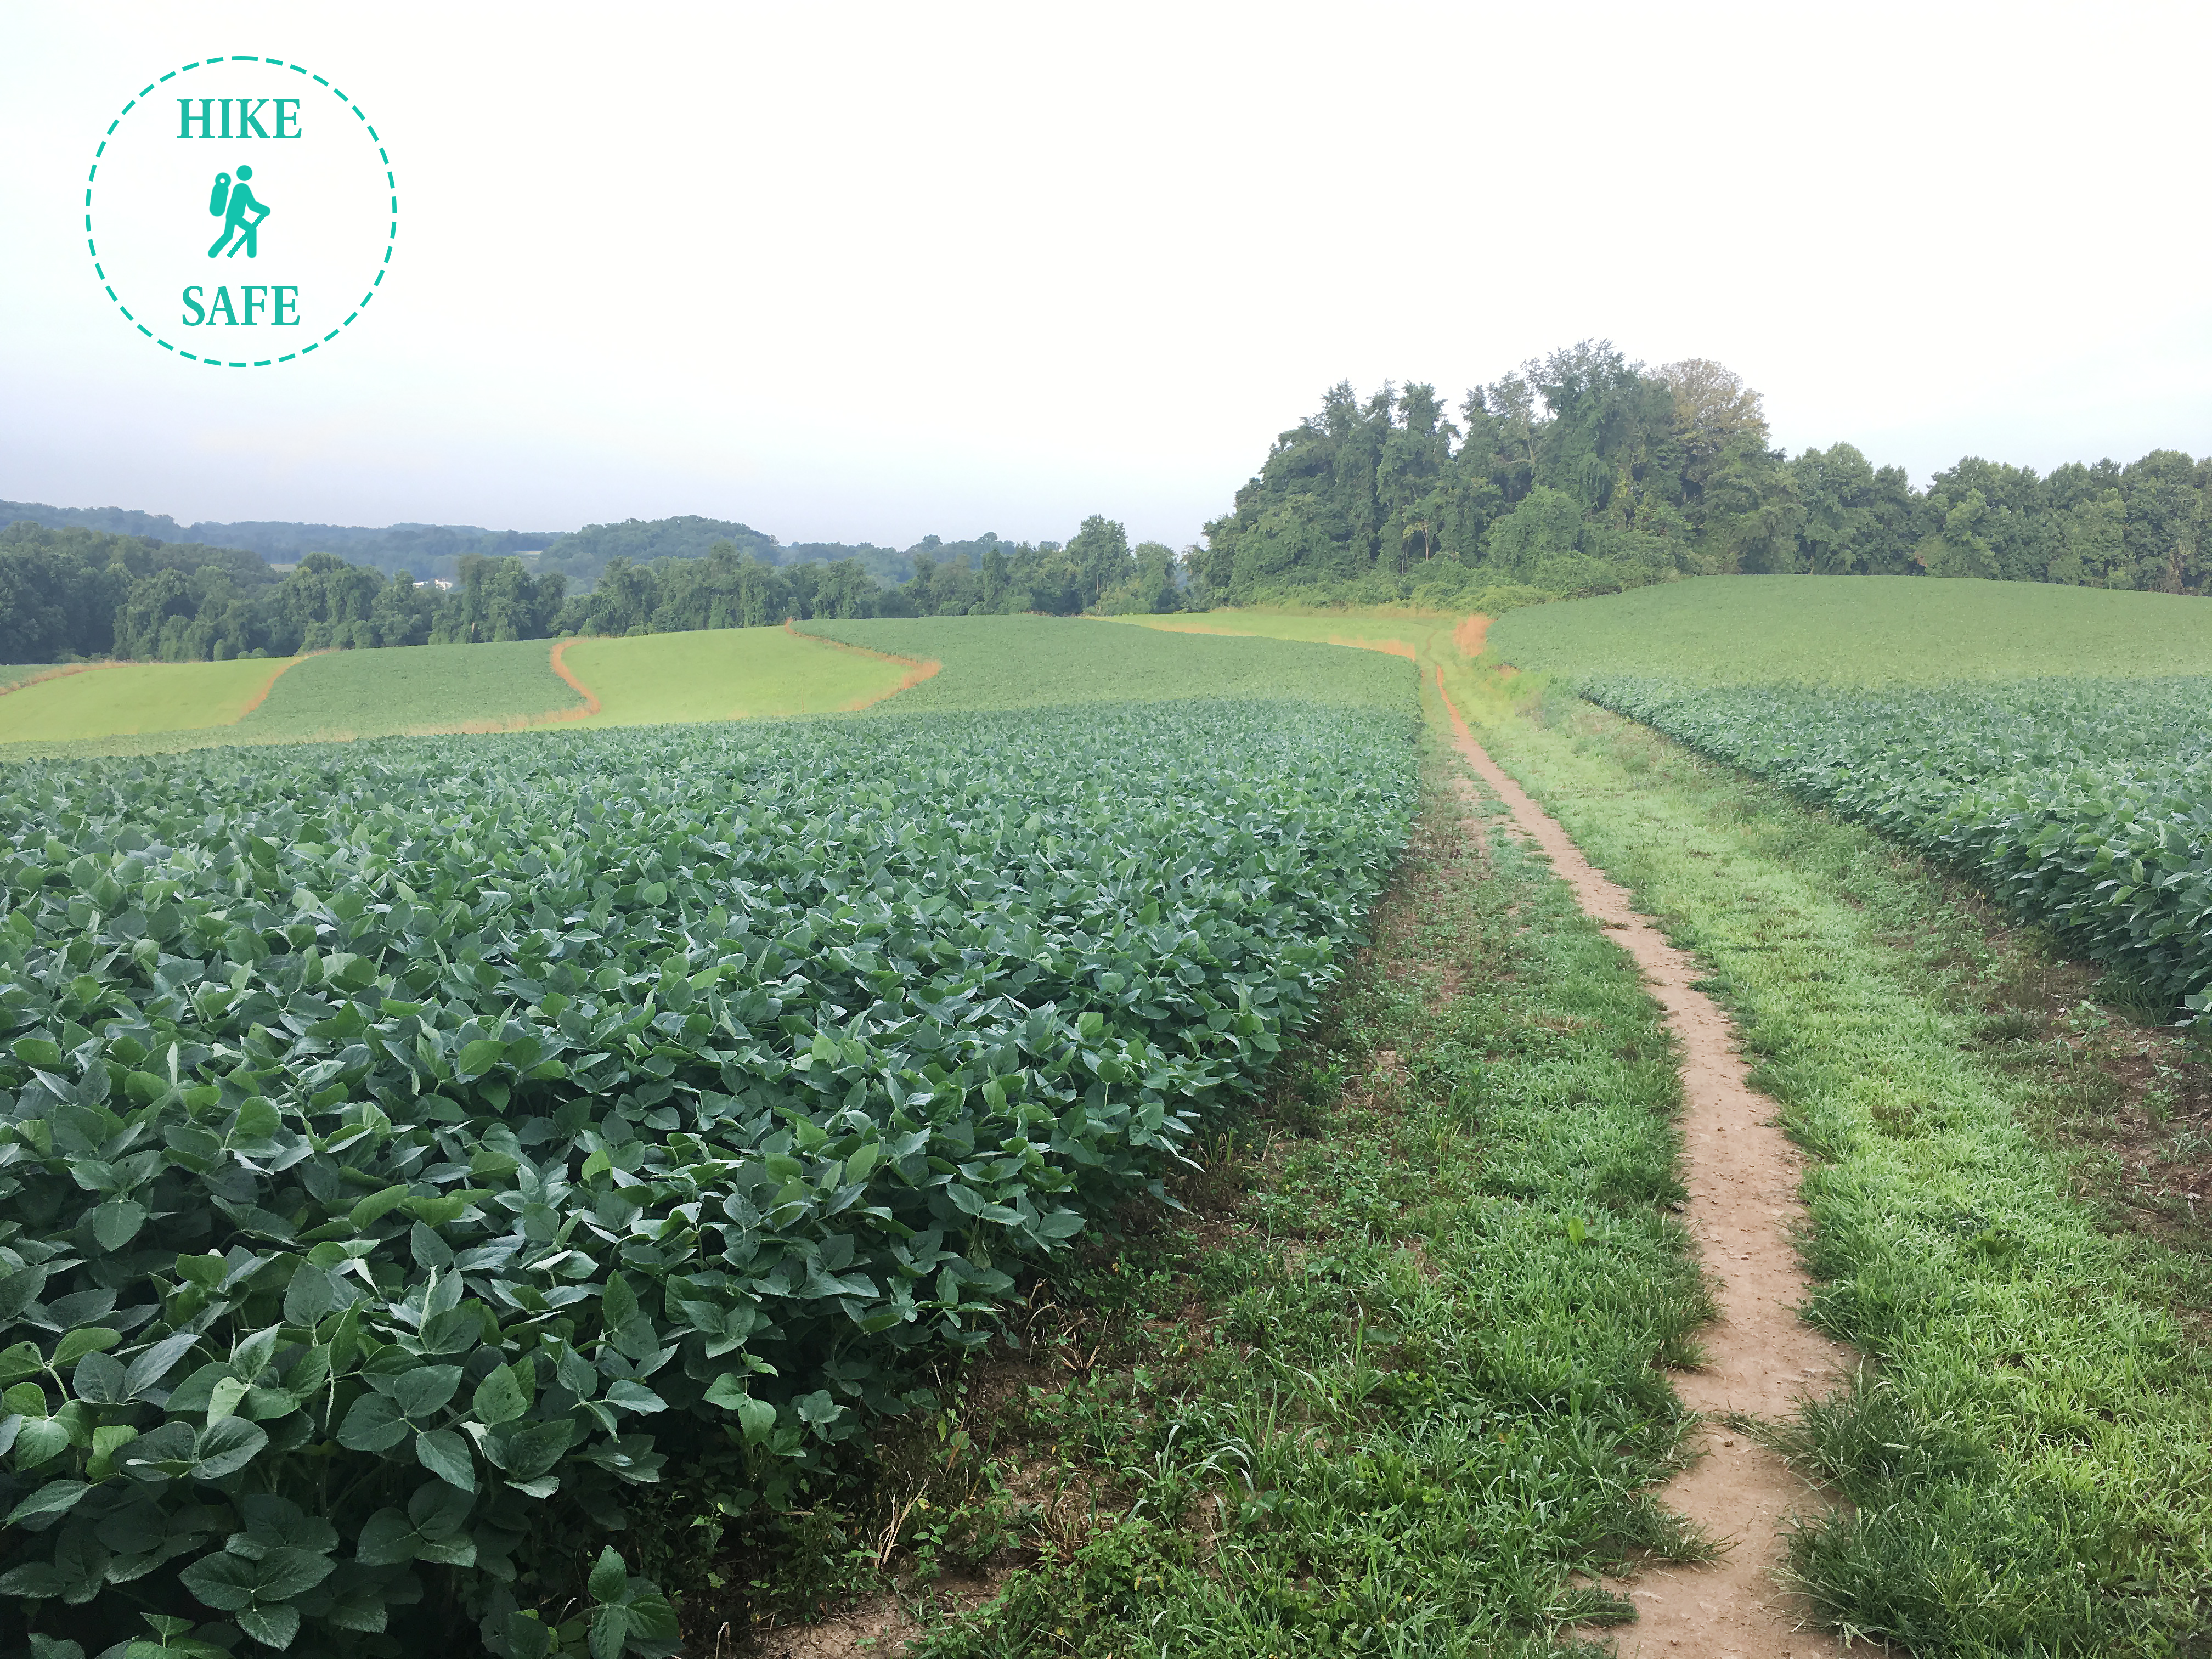 A trail cuts through an agricultural field with a stamp that says hike safe.